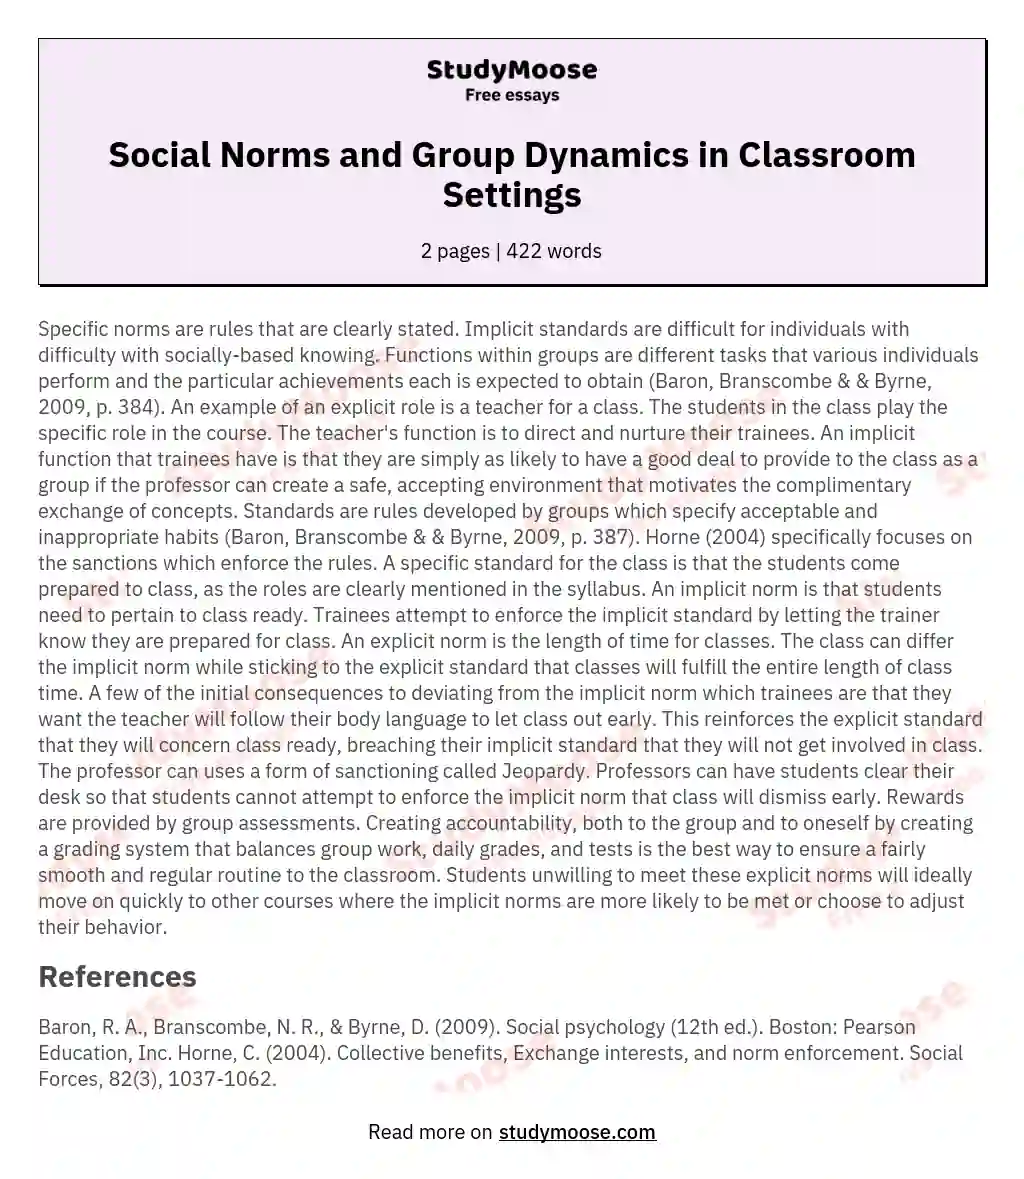 Social Norms and Group Dynamics in Classroom Settings essay